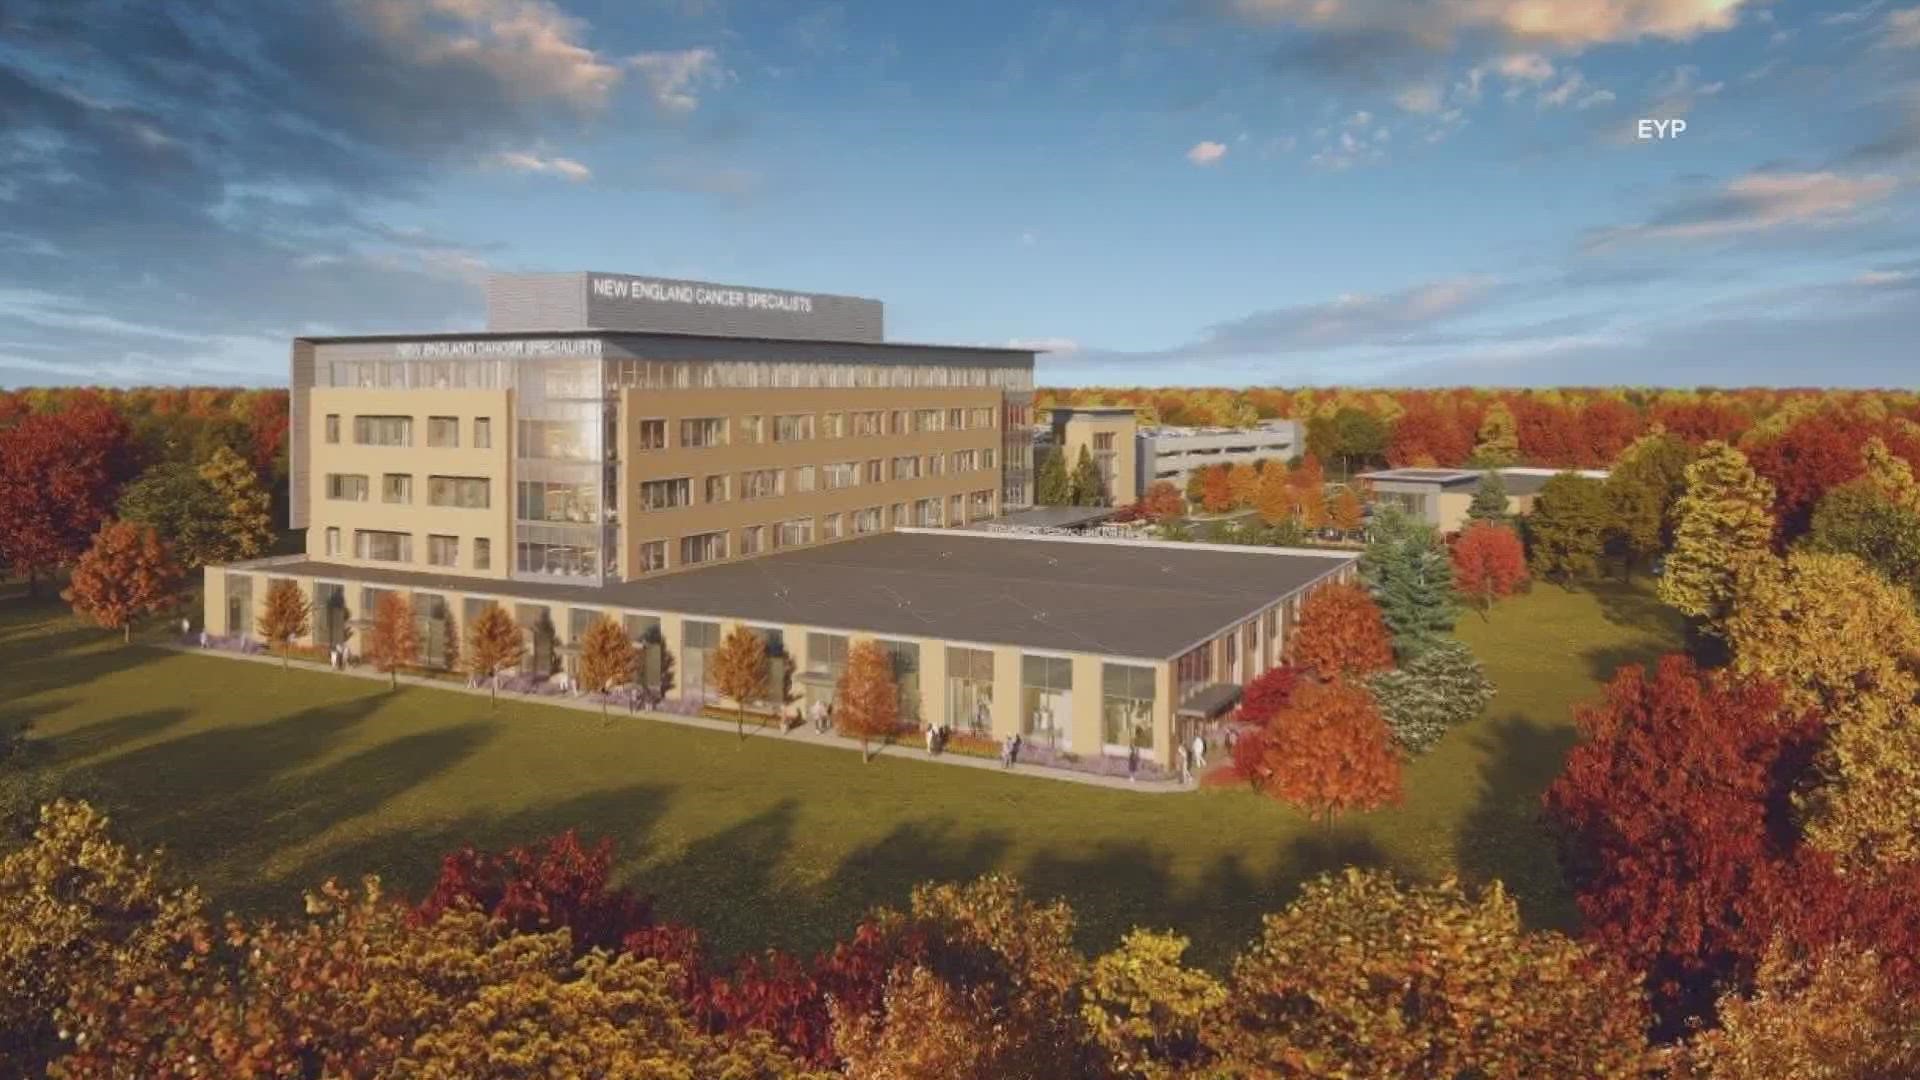 Construction of the Rock Row medical and research campus is set to begin in June 2022.